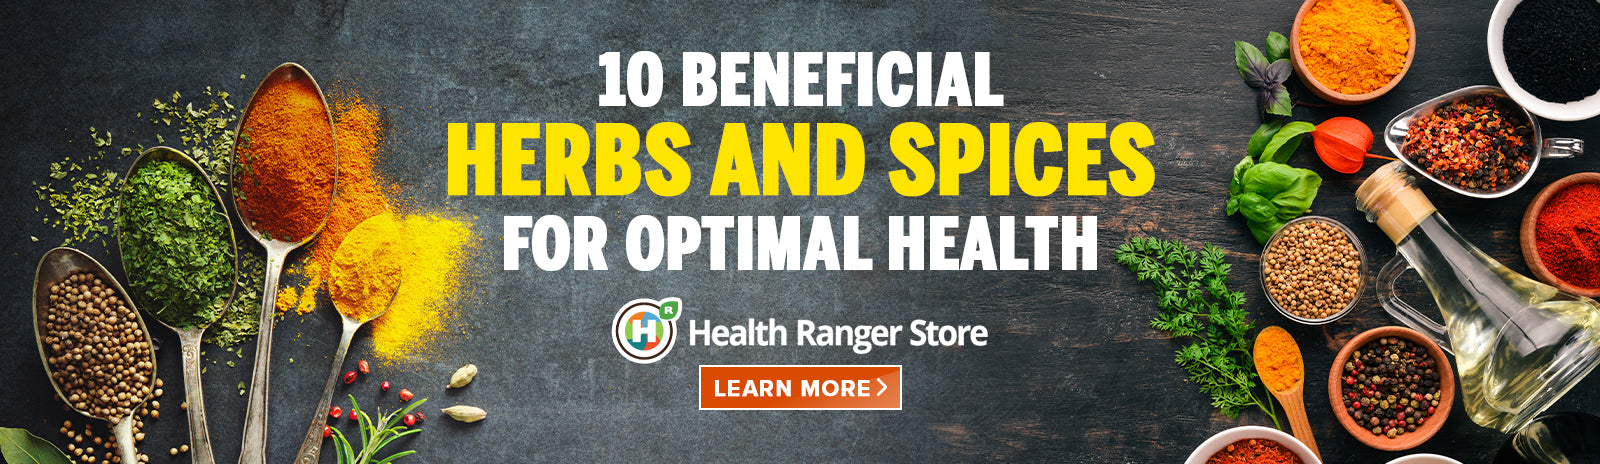 Here are 10 of the most beneficial herbs and spices for optimal health